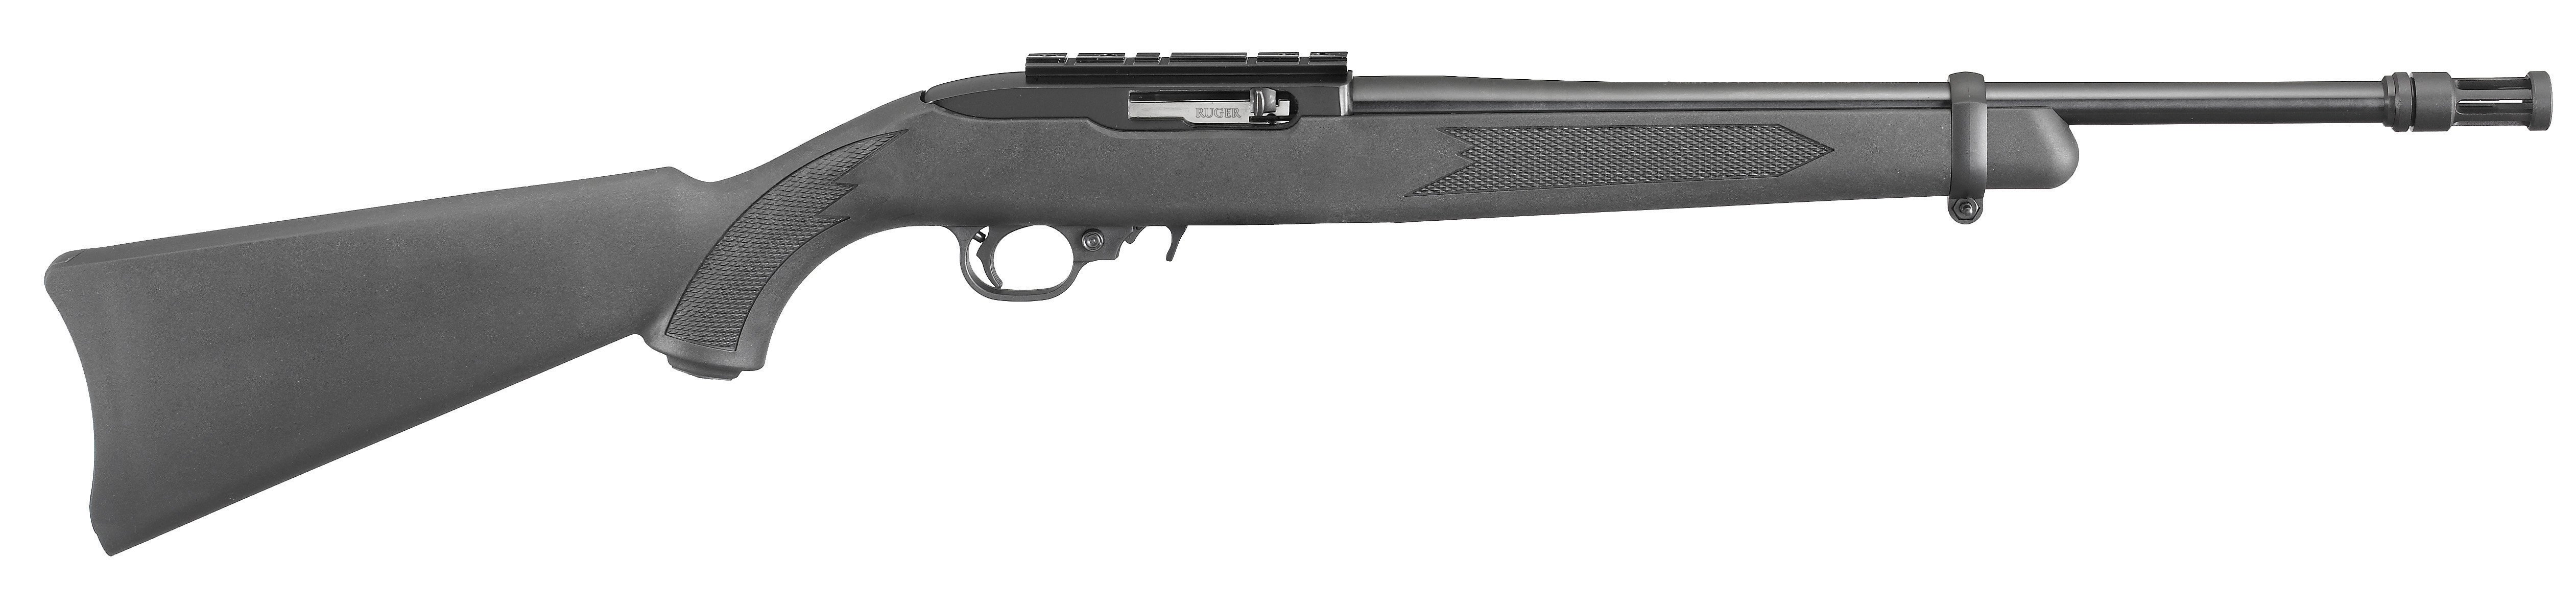 10/22 Tactical, satin black, black synthetic stock